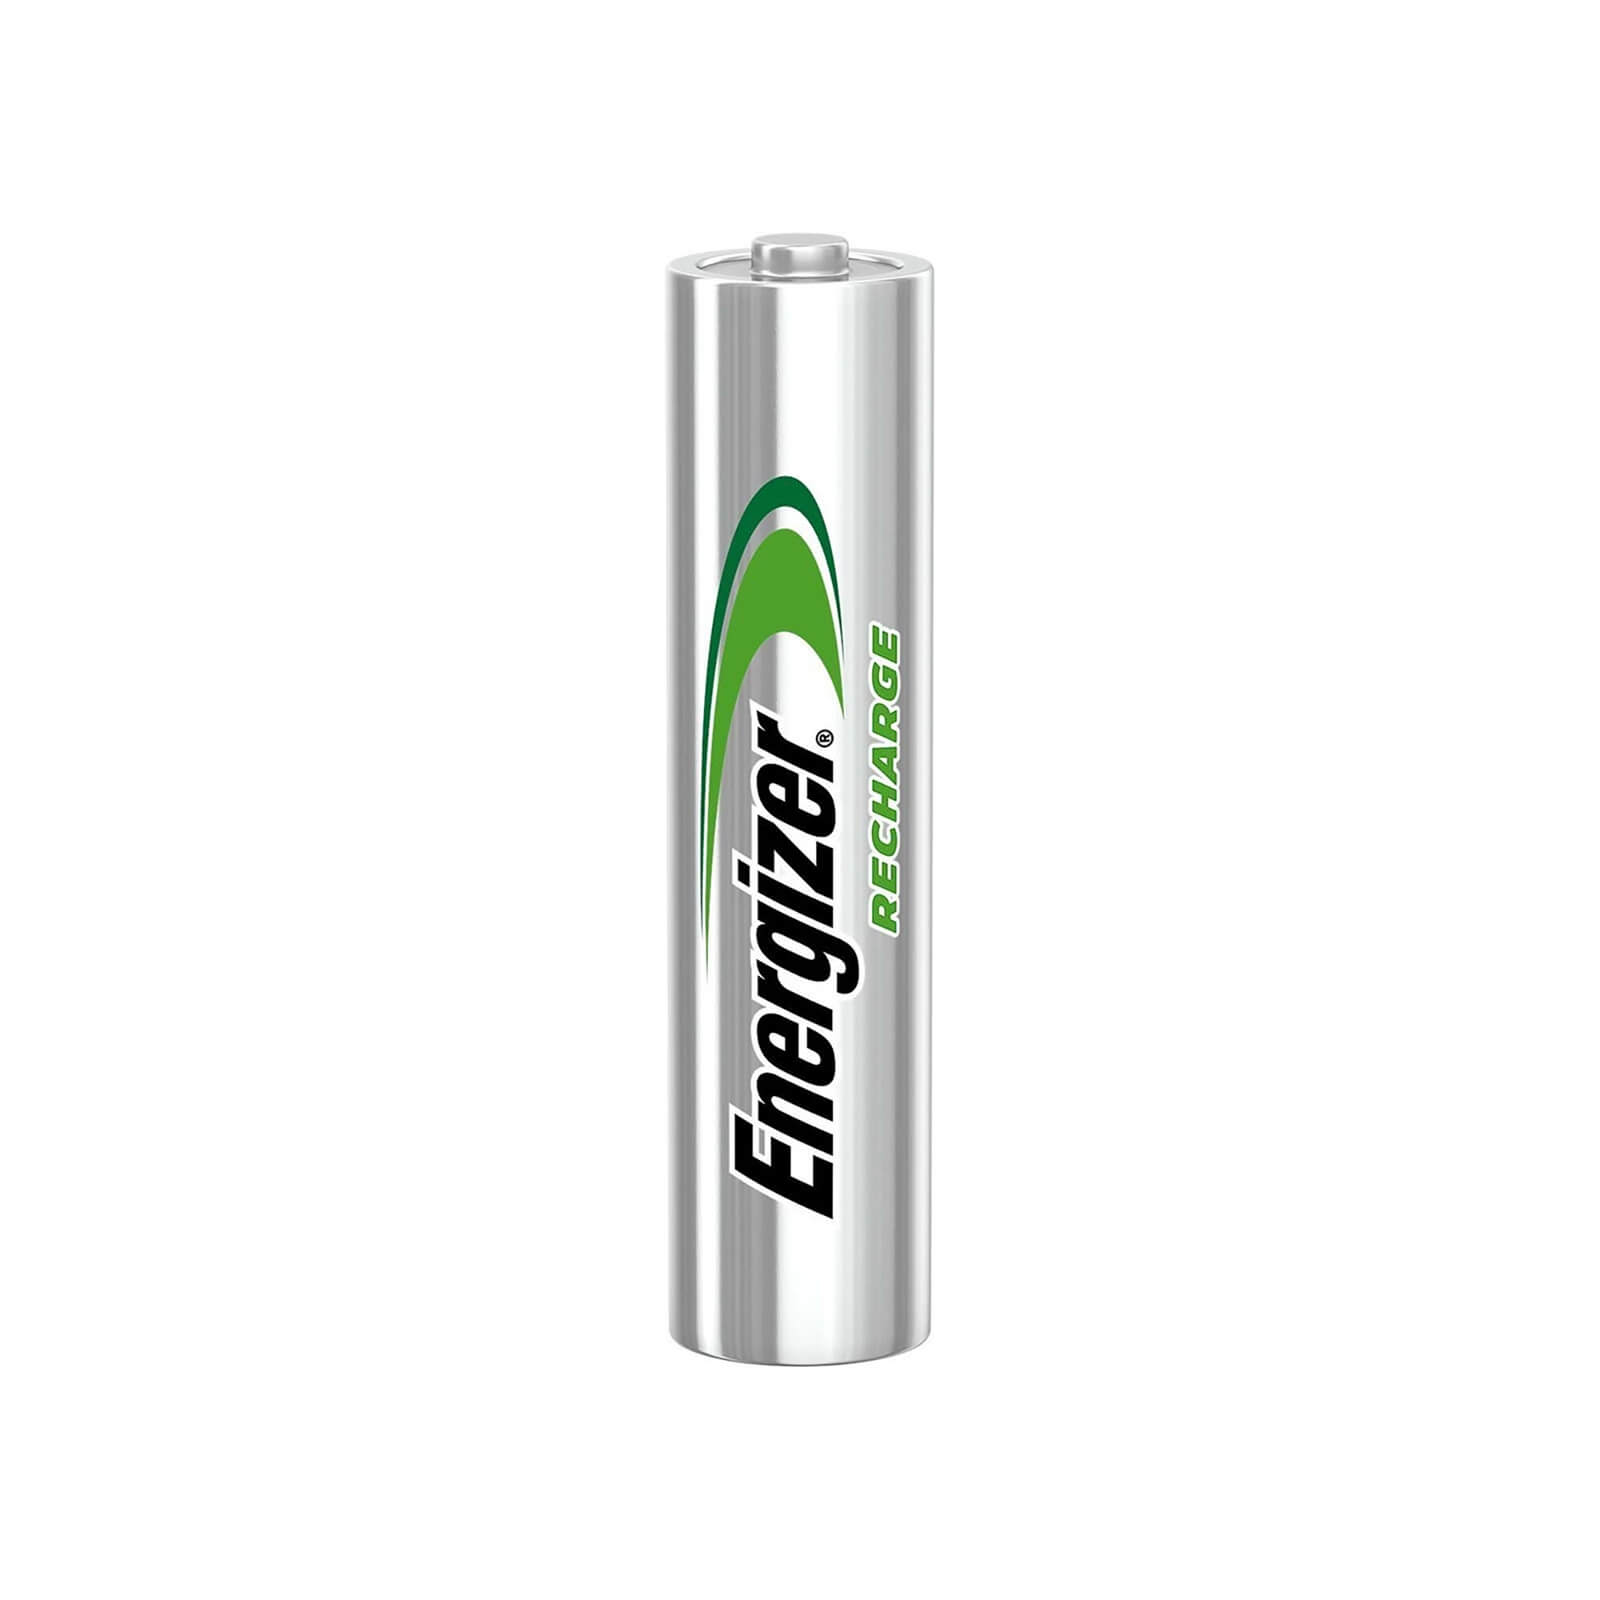 Energizer Power Plus 700mAh Rechargeable AAA Batteries - 4 Pack